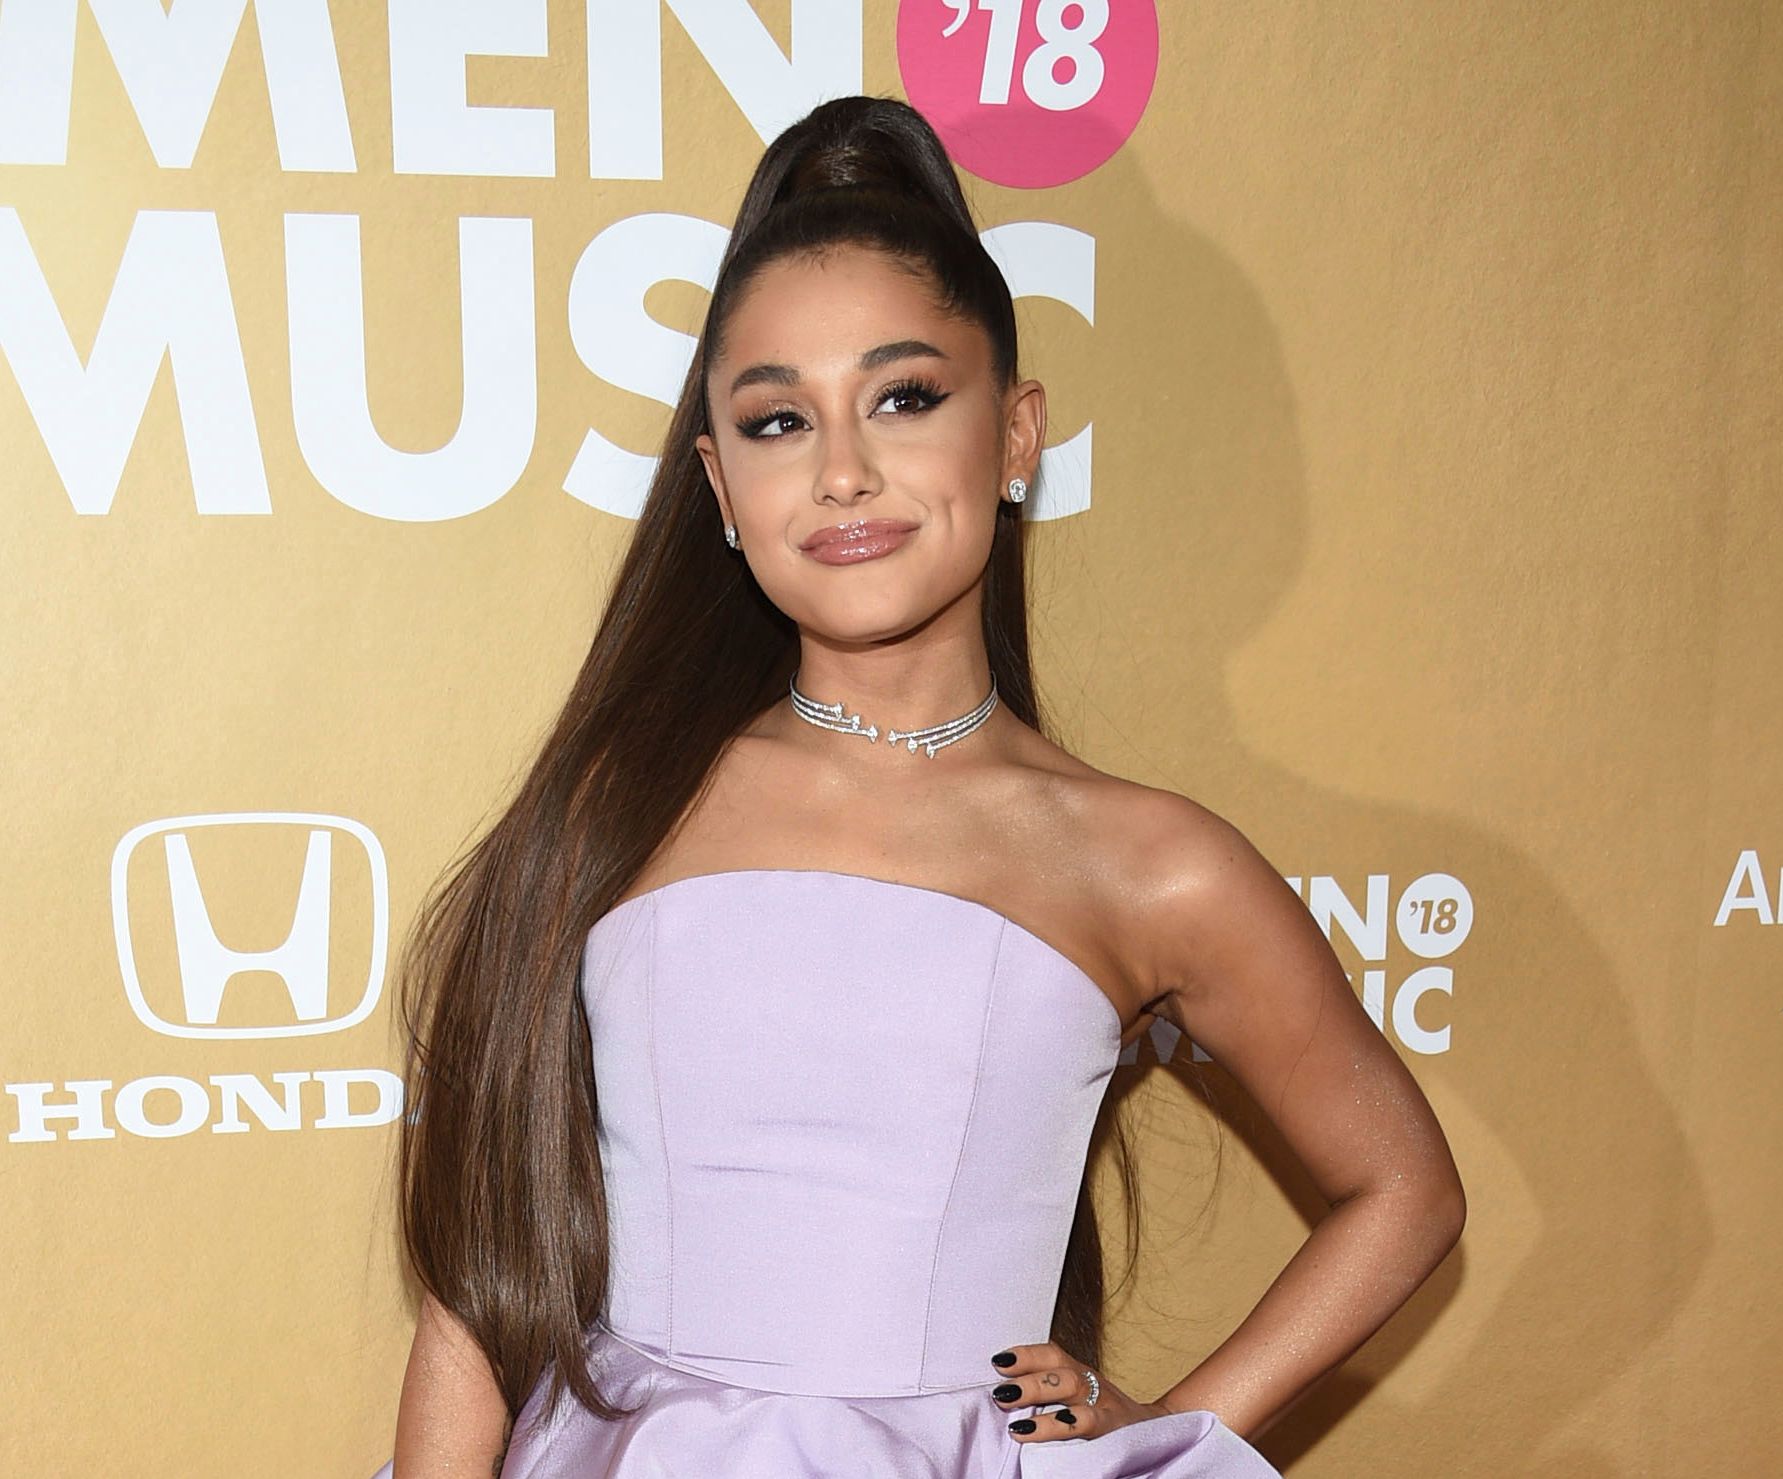 Ariana Grande will play the witch in 'Wicked' - VG